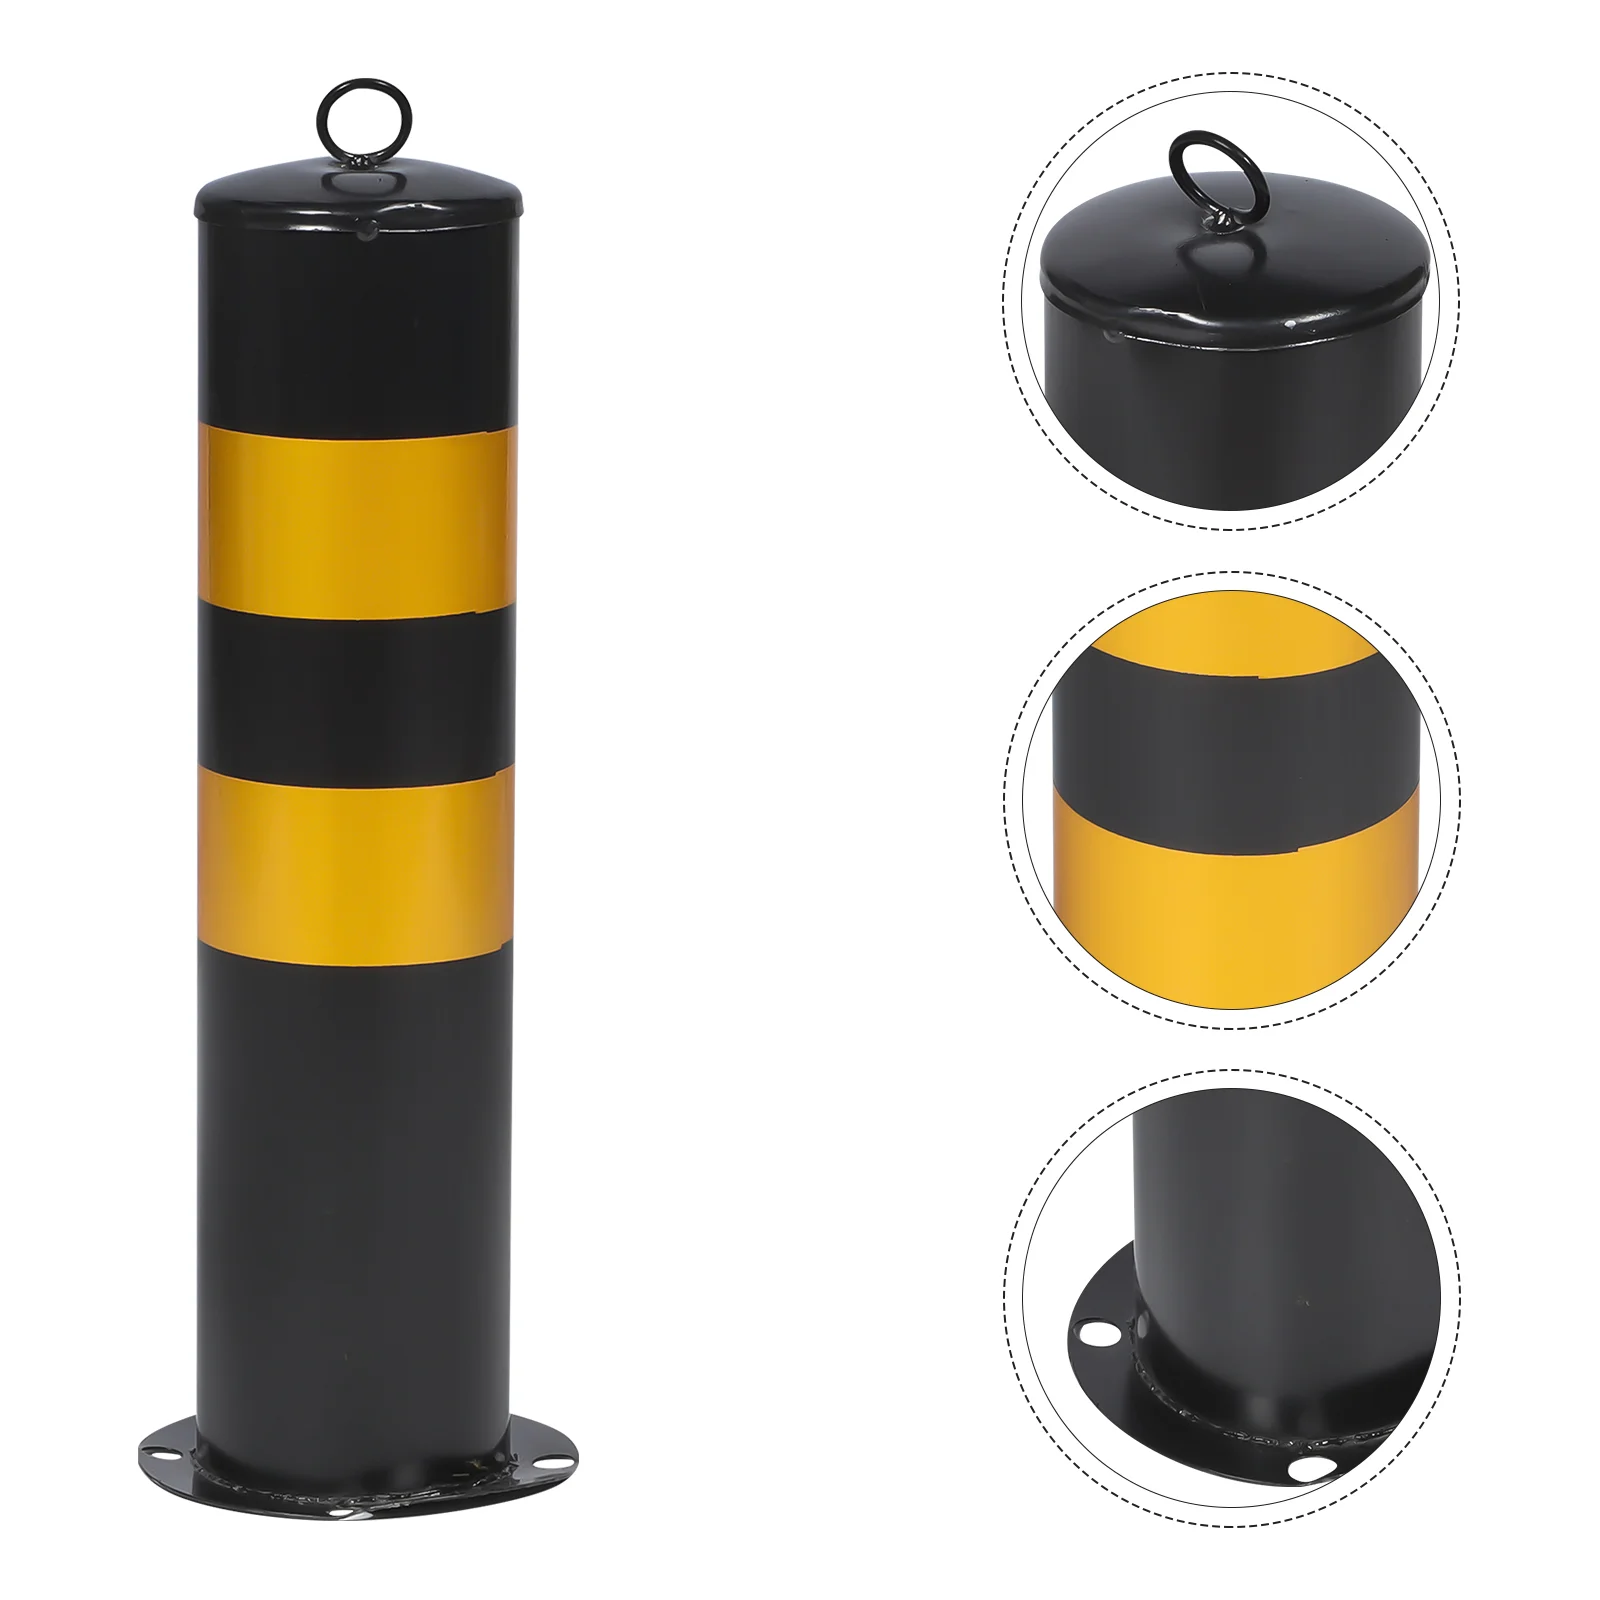 Safety Traffic Bollard Post Parking Driveway Barrier Lot Column Cones Bollards Pile Fence Gate Delineator Guard High Stopper